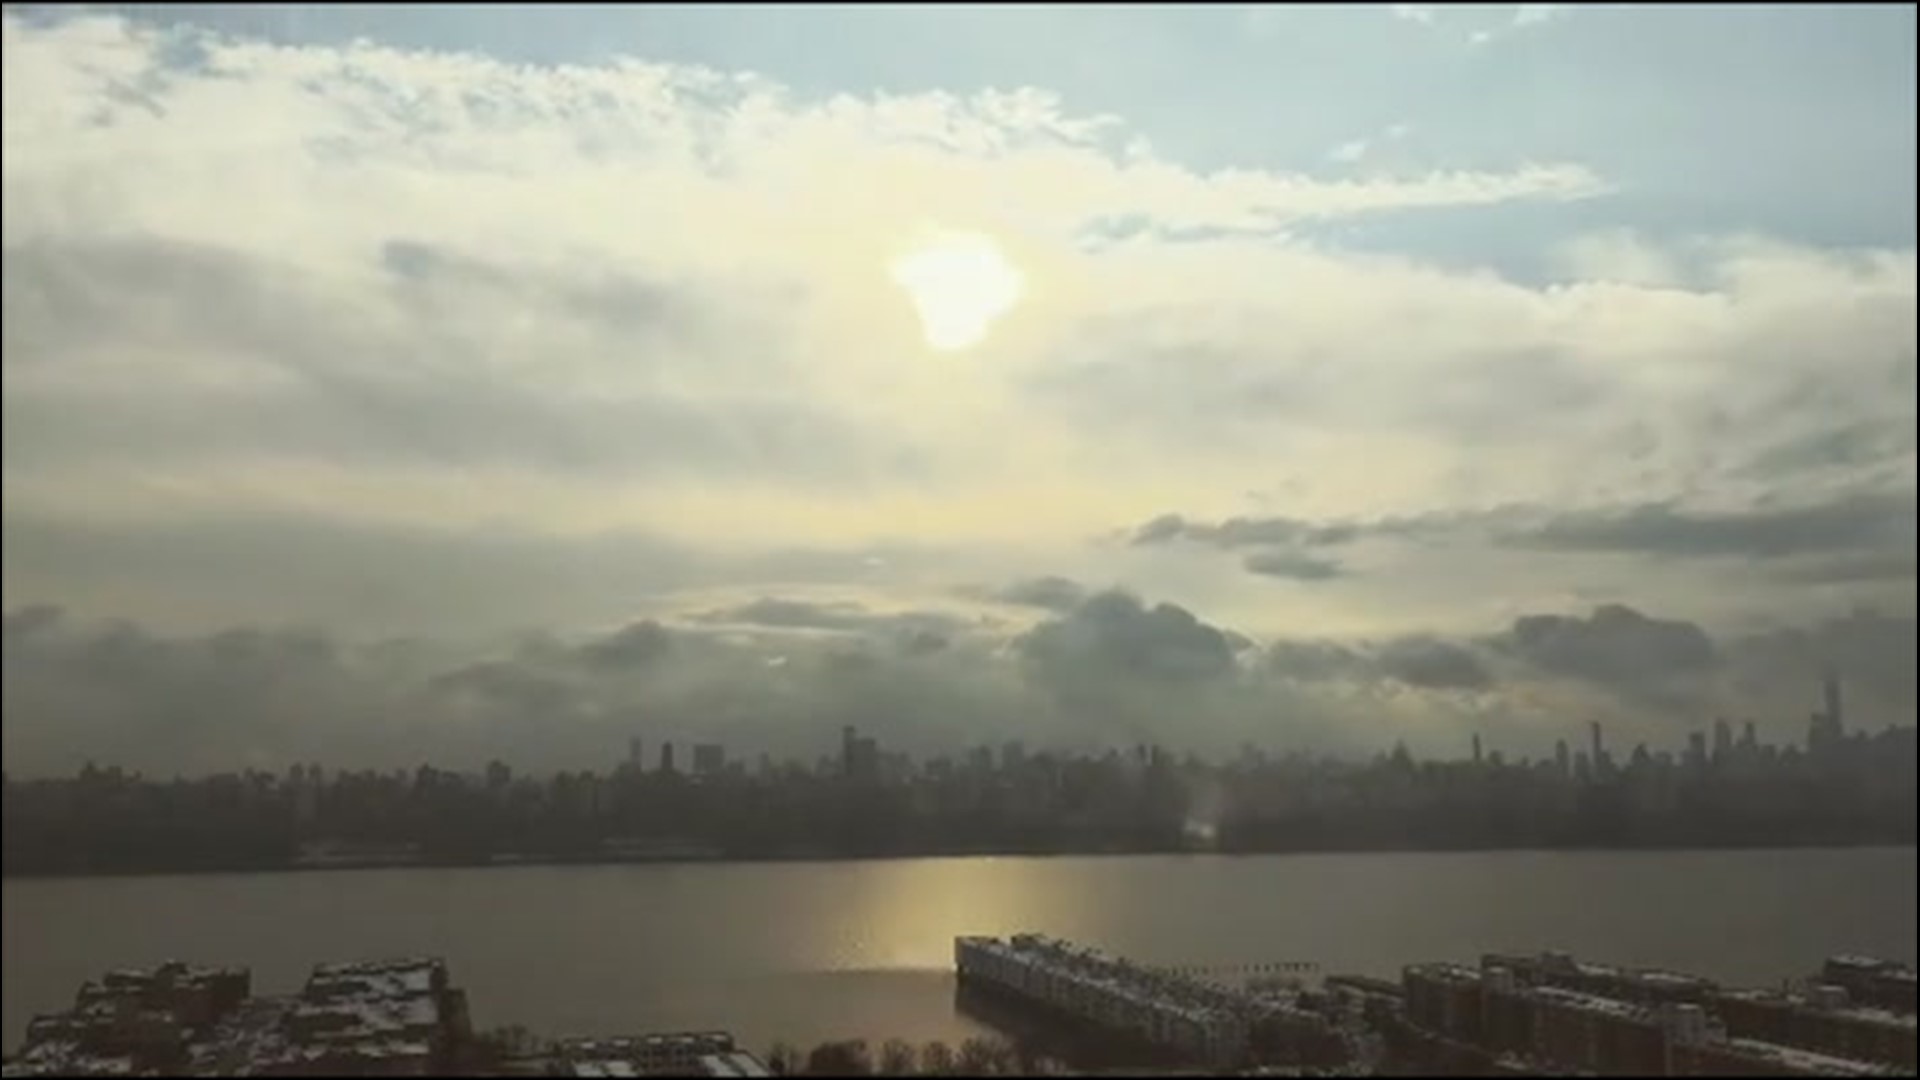 Despite a few clouds, the sun shined on New York, New York, on Jan. 20, creating this fantastic view of the skyline.